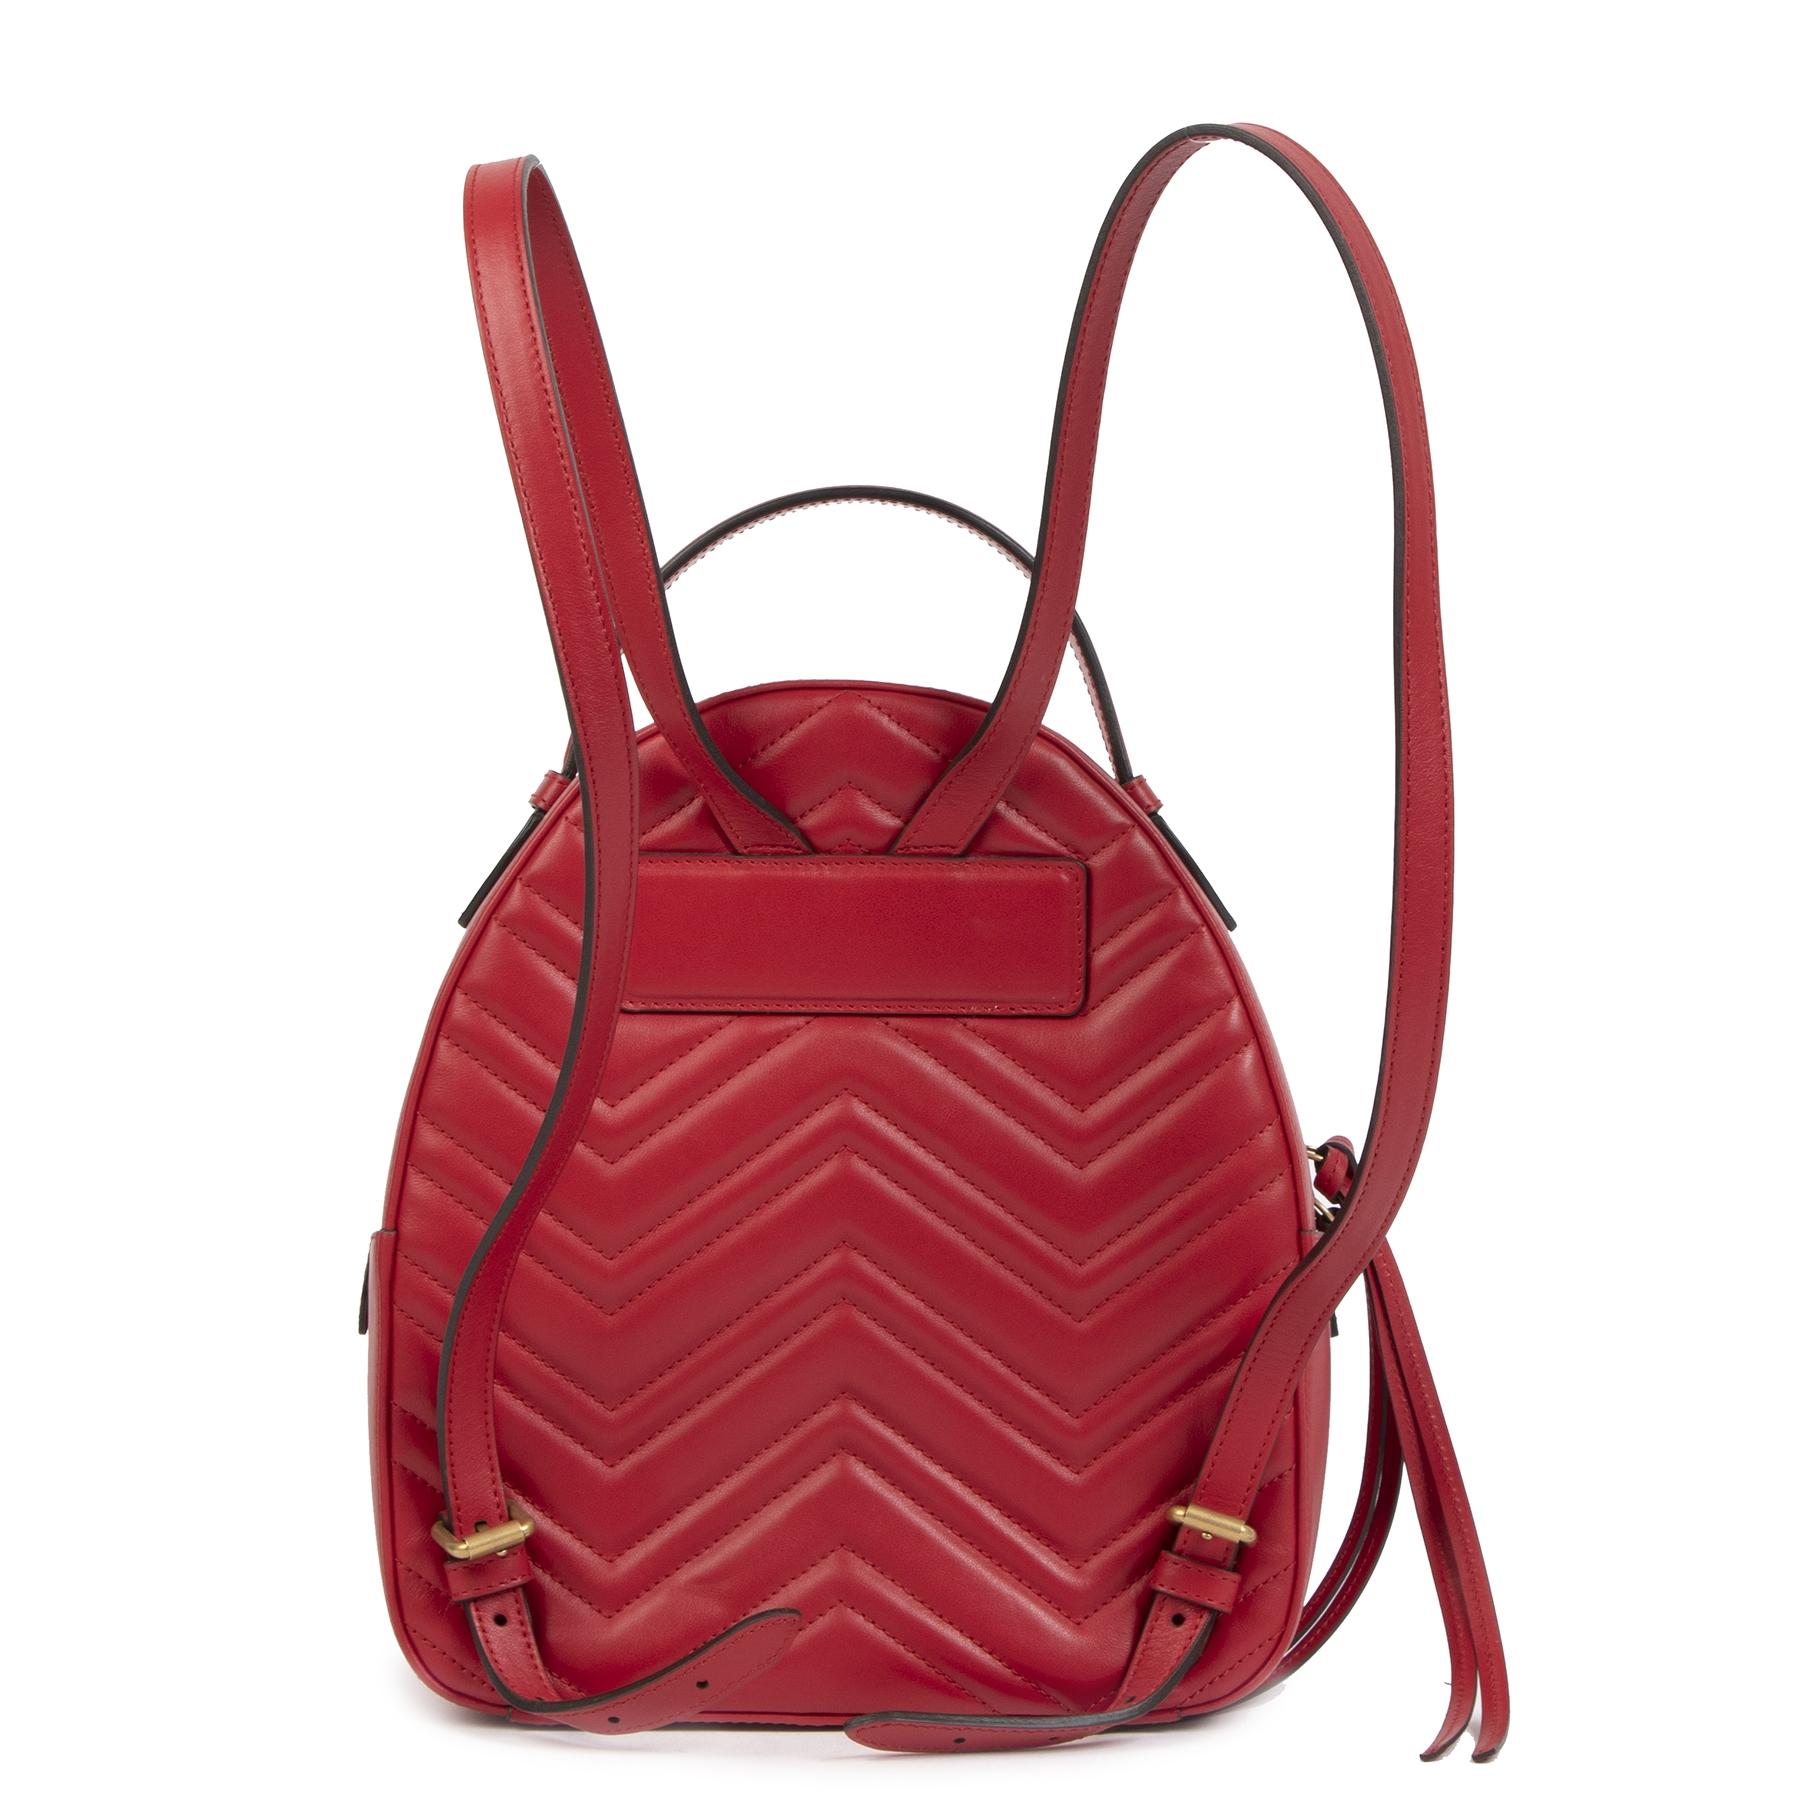 Very good preloved condition

Gucci GG Marmont Matelassé Leather Backpack

Carry your belongings in luxurious style with this Gucci GG Marmont backpack. The perfect everyday carryall. Crafted from red matelasse chevron quilted leather and features